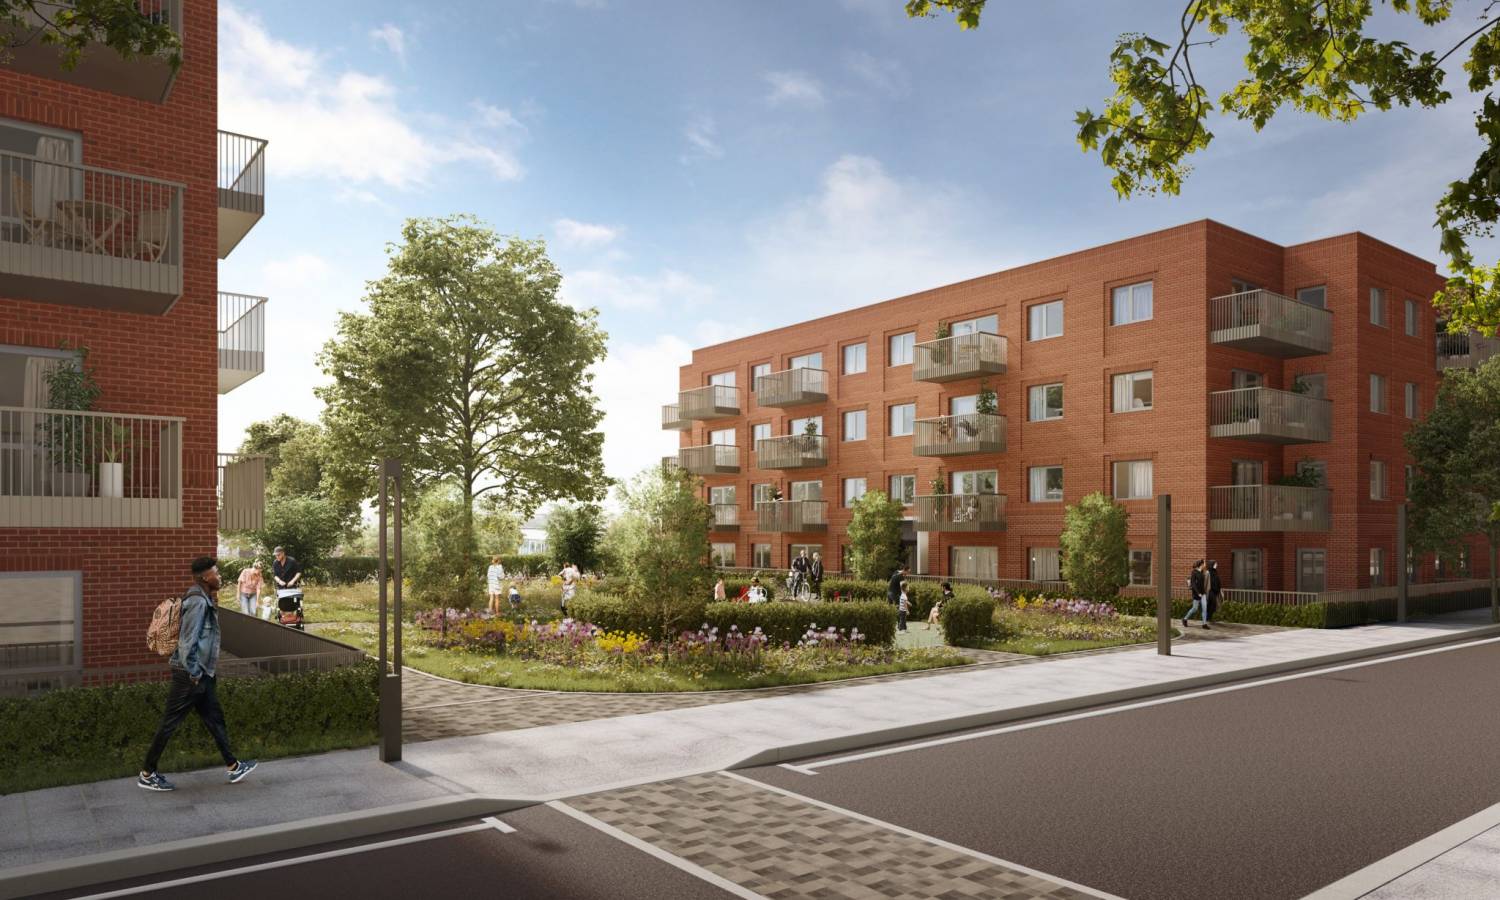 A new exciting development: more than 800 new homes to be available in Tooting Bec